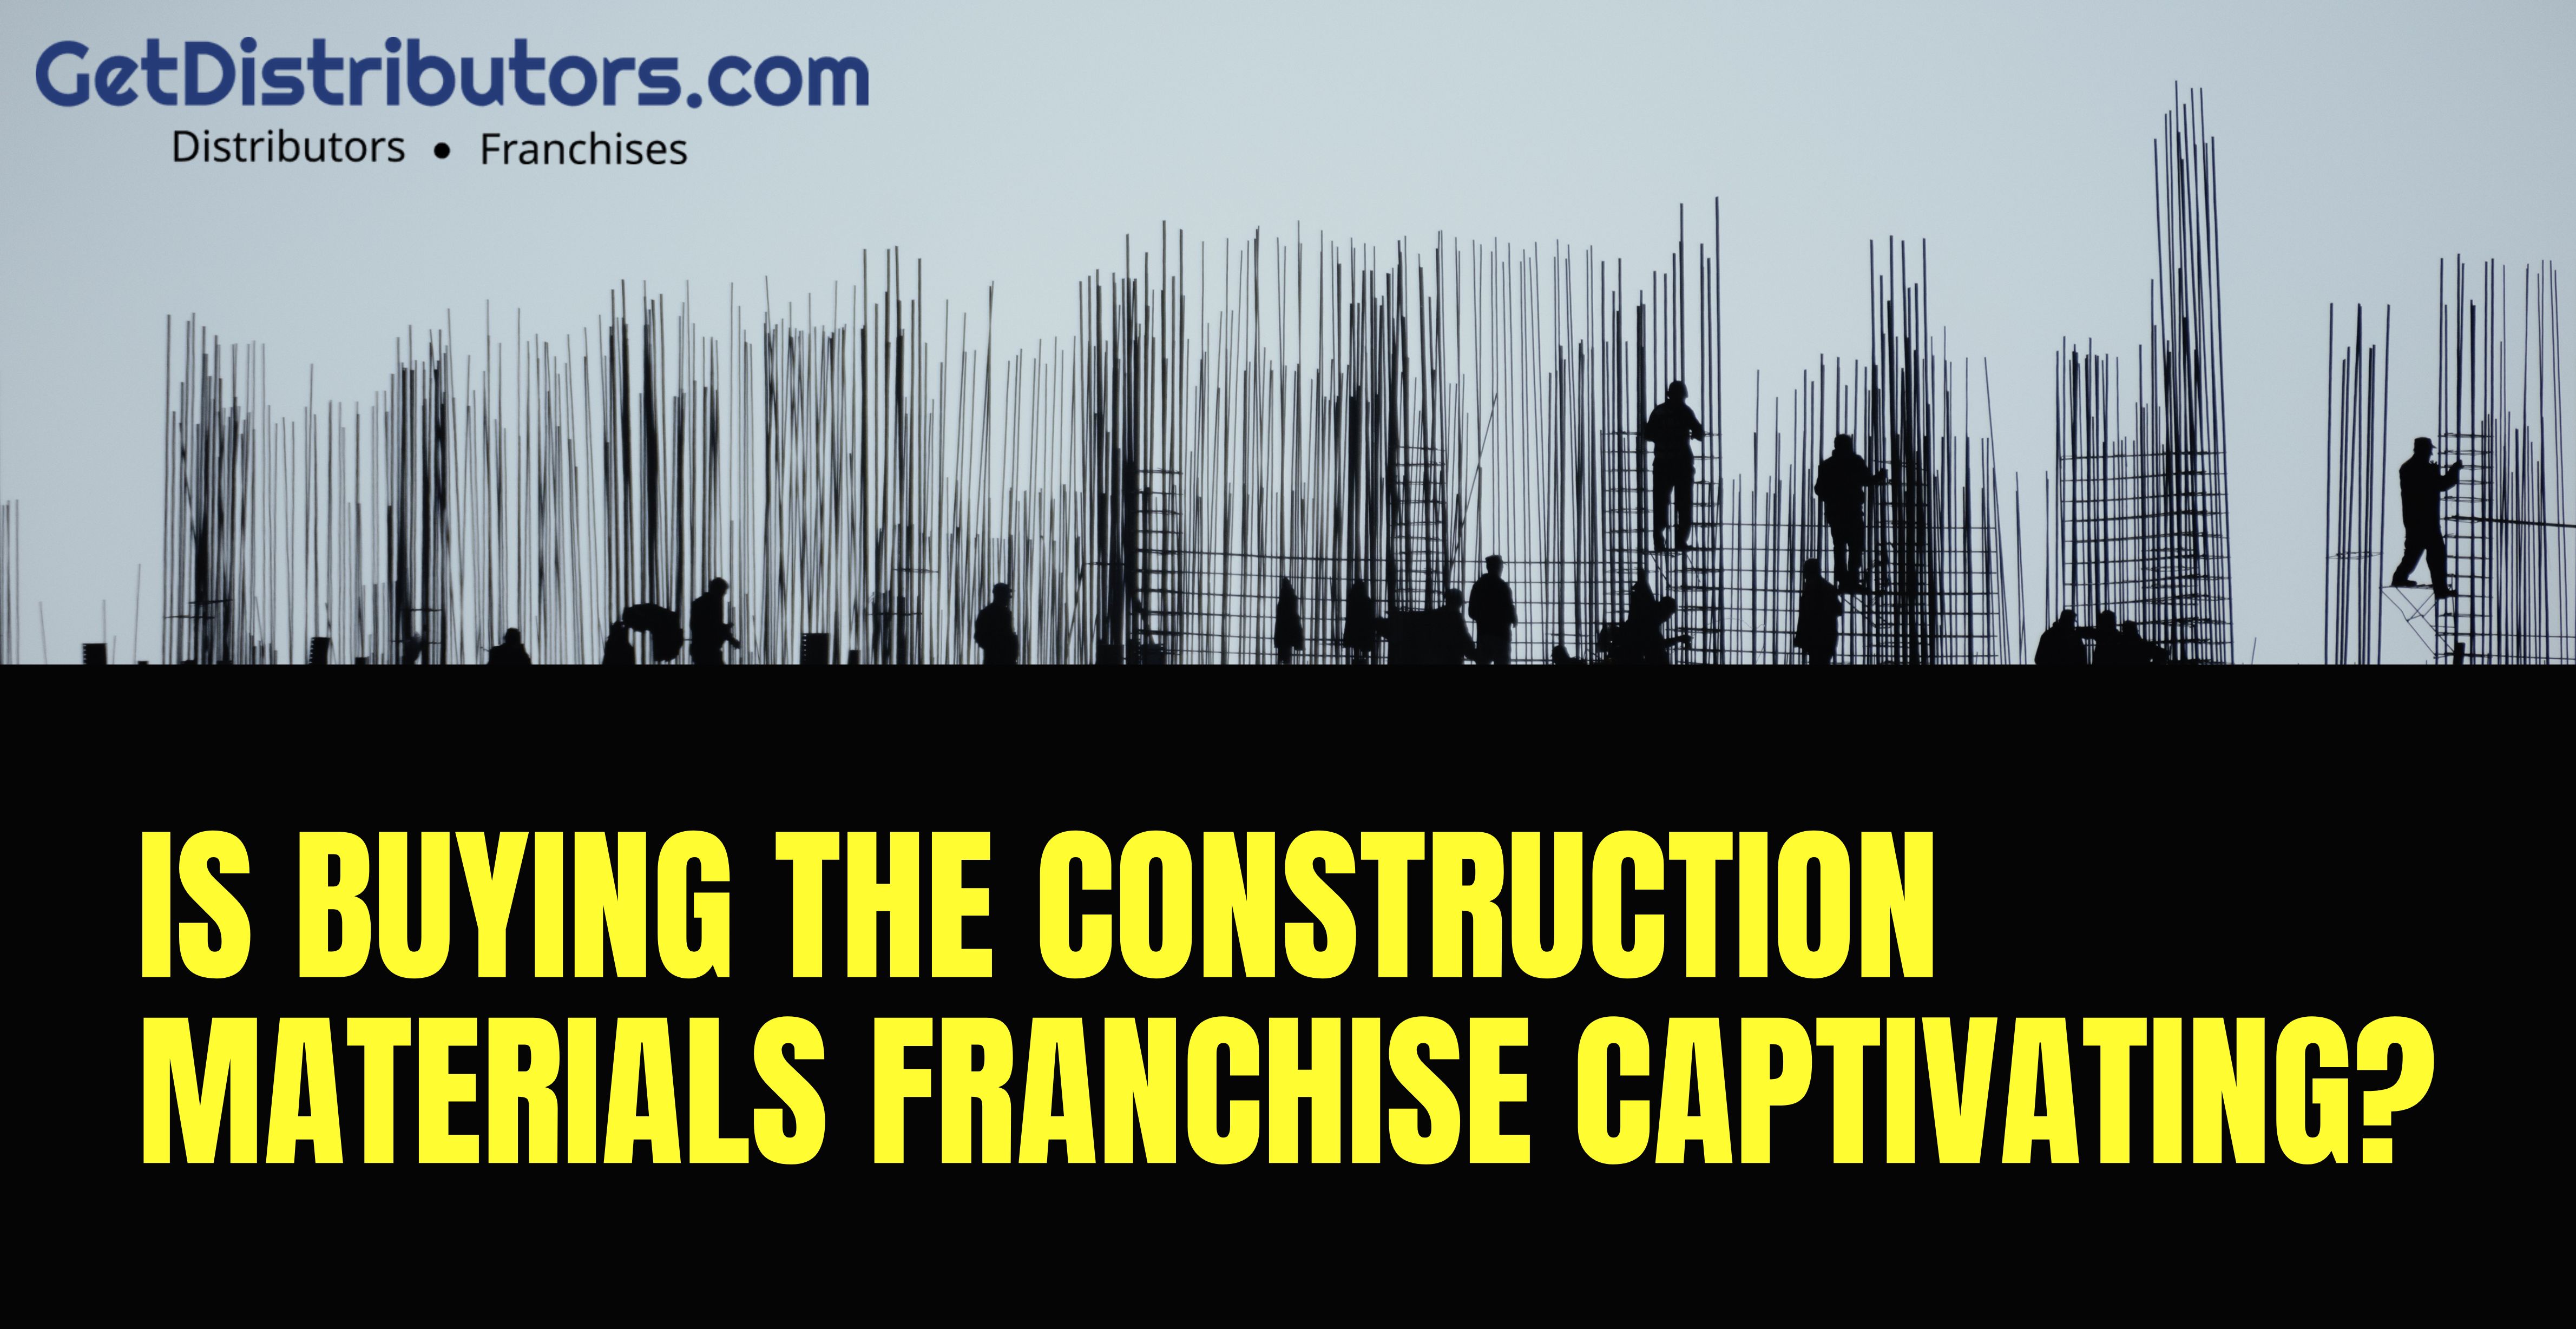 Is Buying the Construction Materials Franchise Captivating?